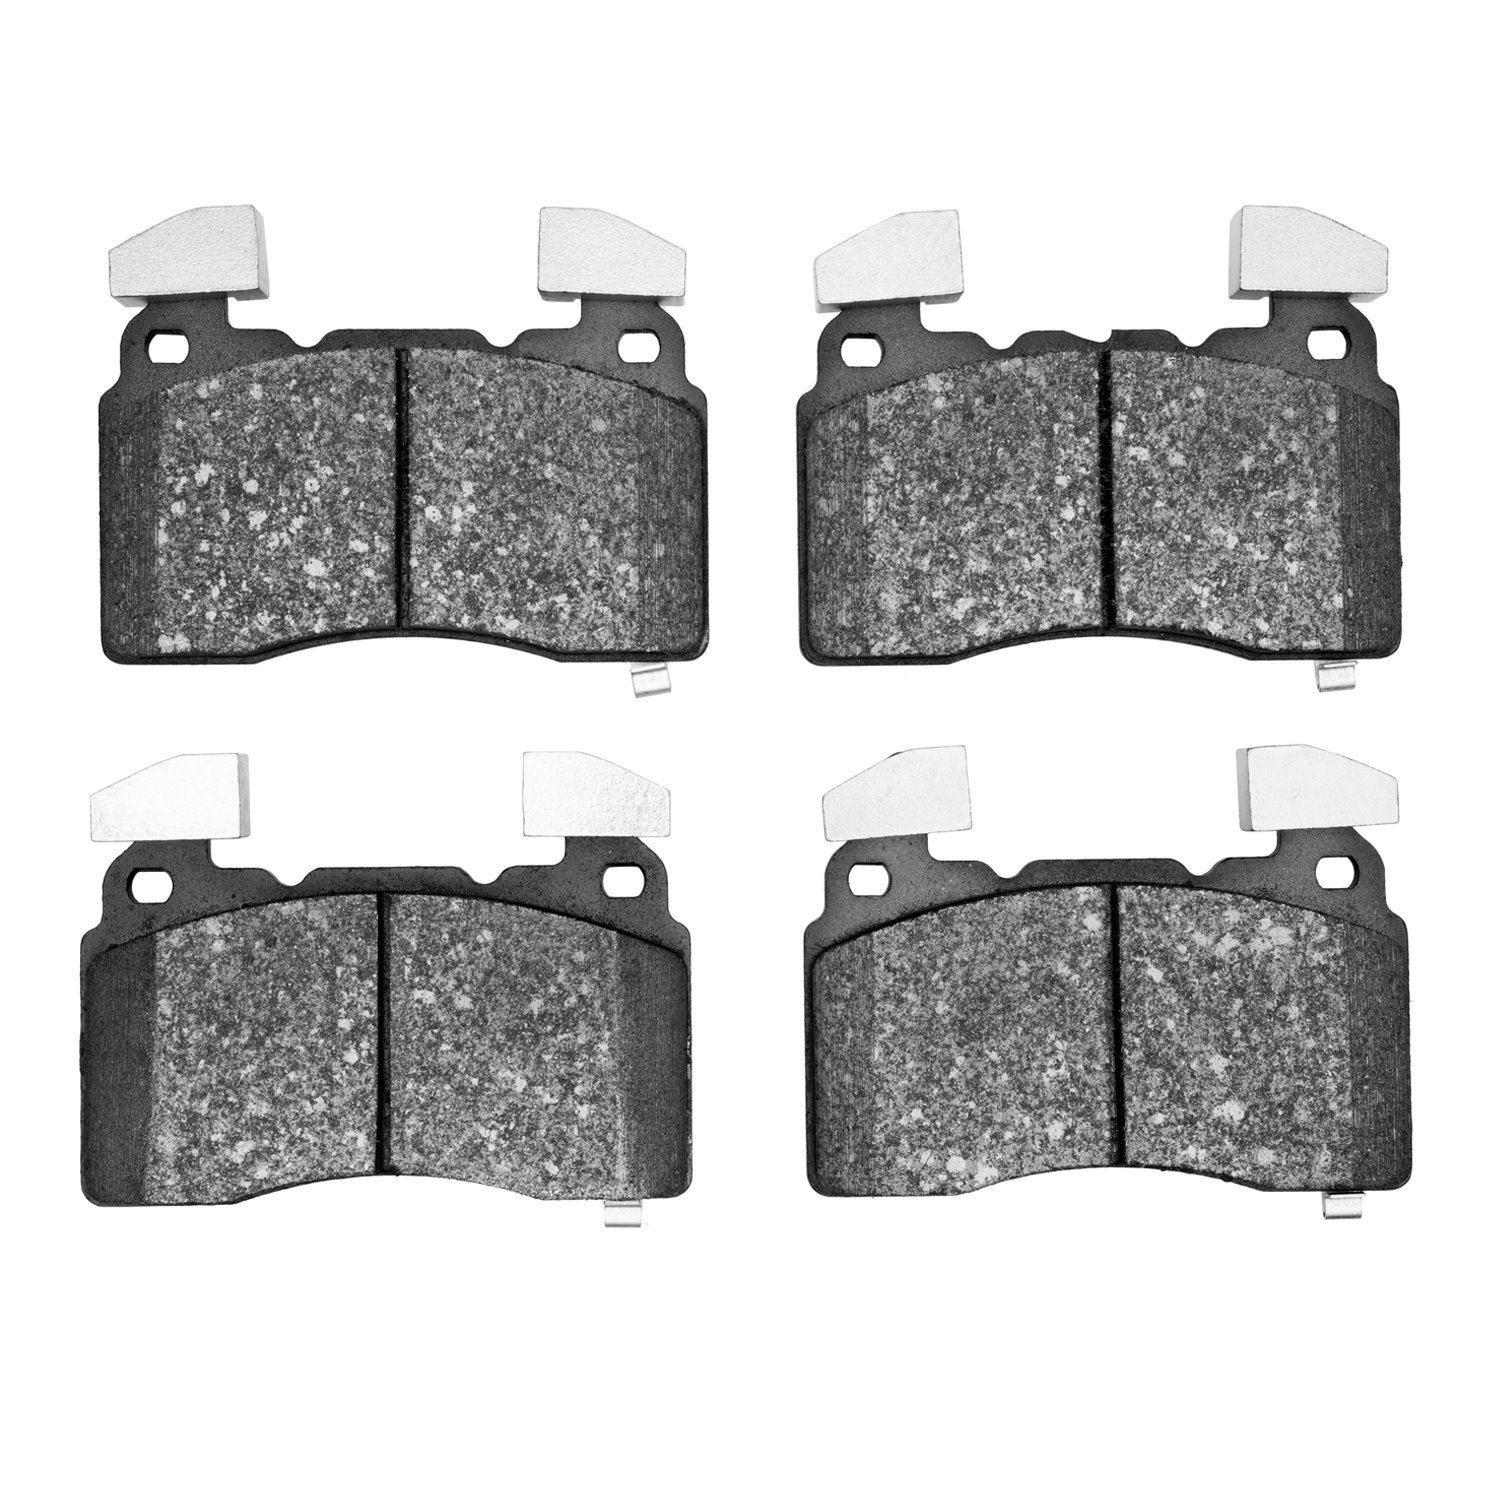 1115-1474-10 Active Performance Low-Metallic Brake Pads, Fits Select Multiple Makes/Models, Position: Front